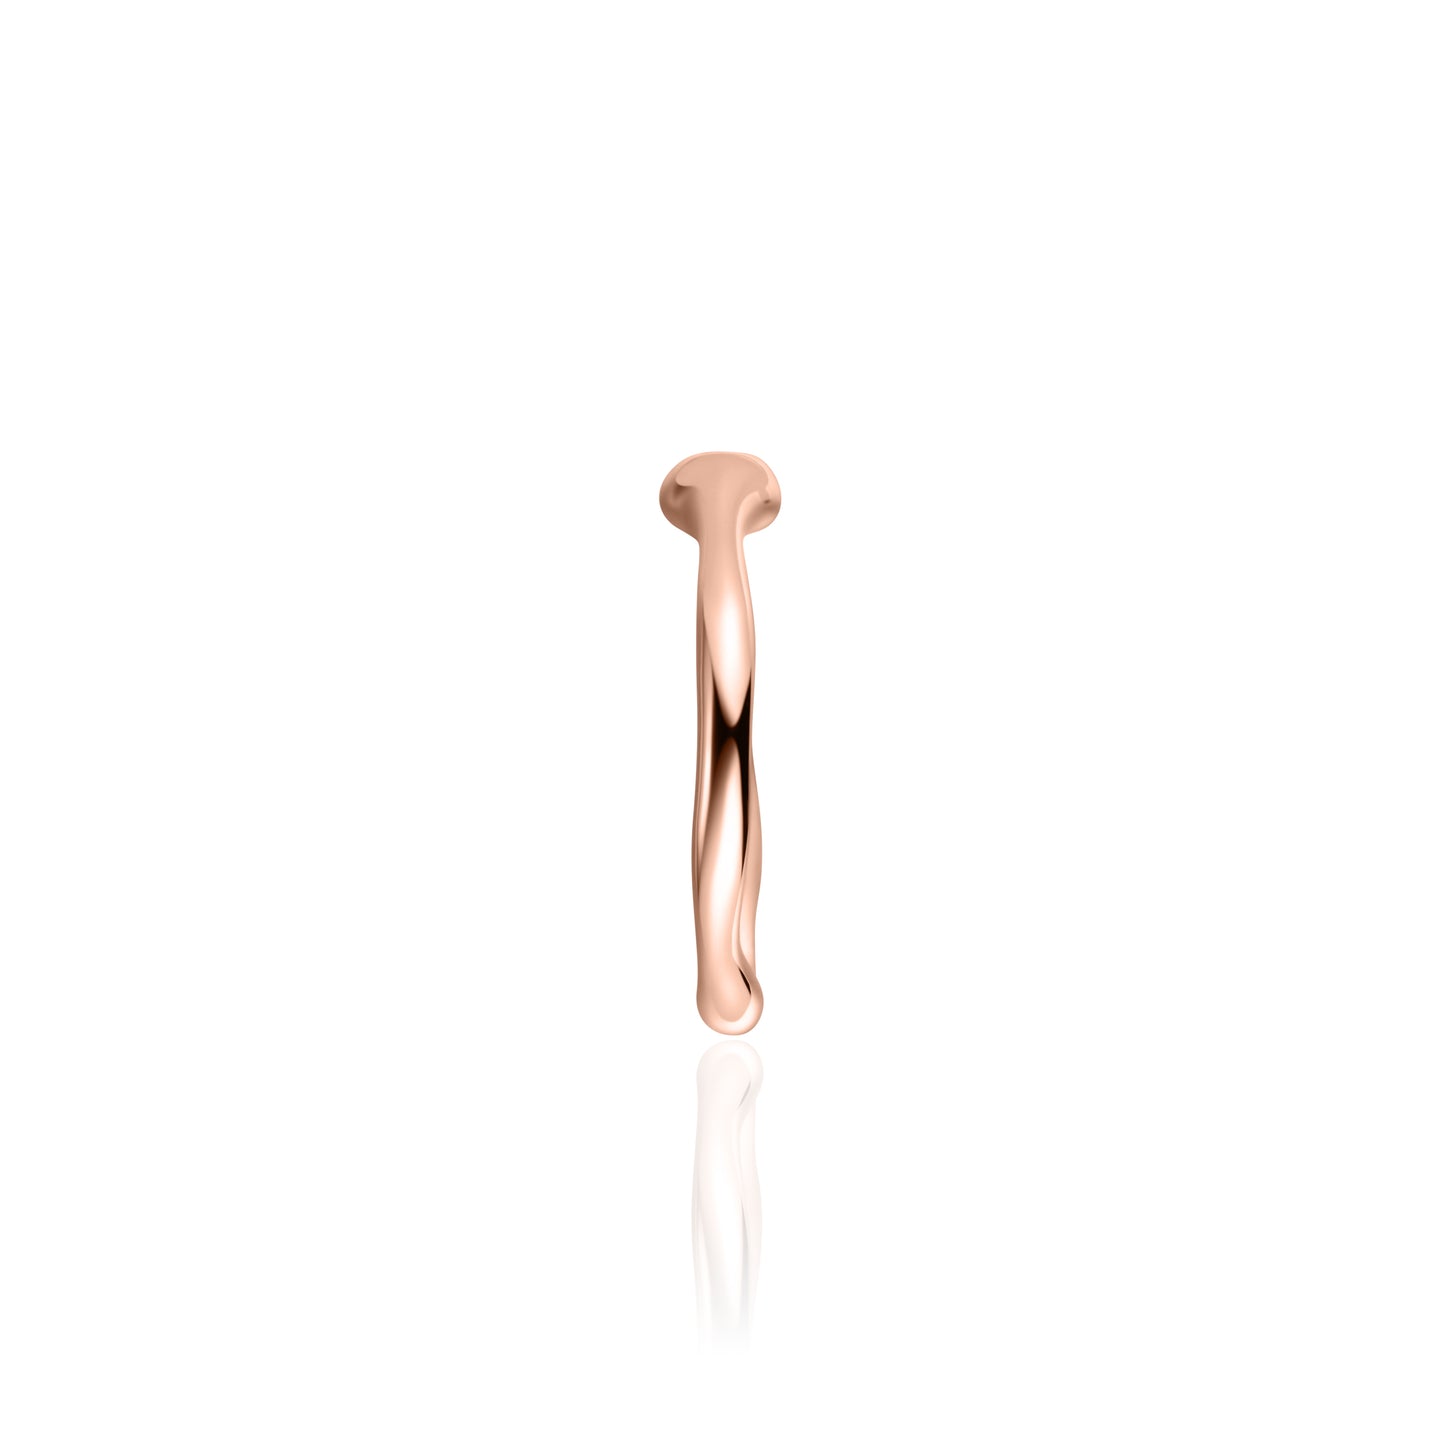 ORGANIC CZ Solitaire Ring - Rose Gold - John Ross Jewellers